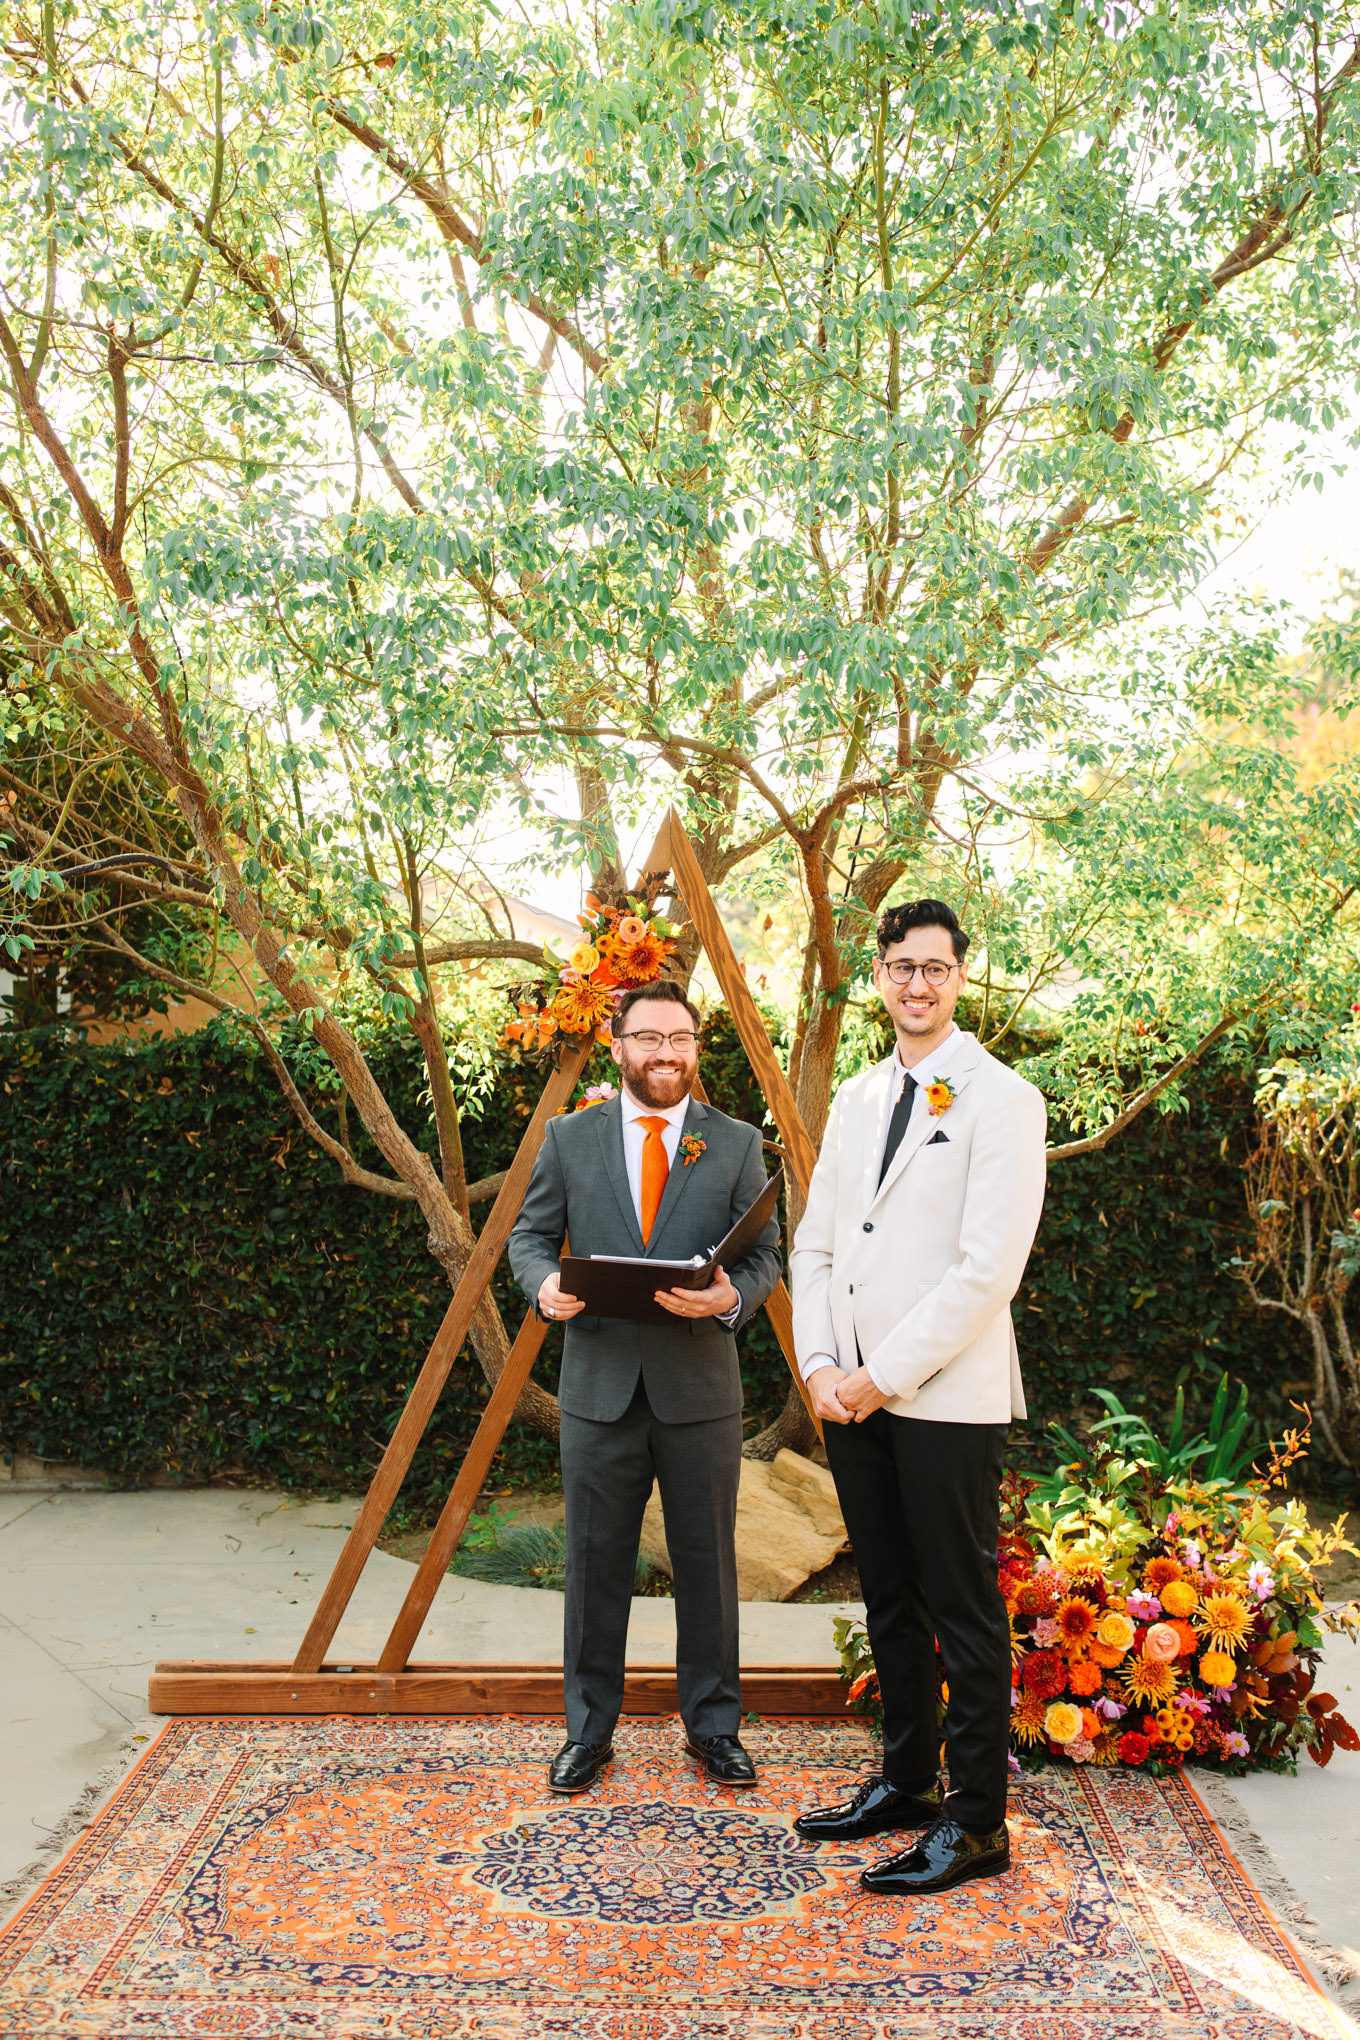 Groom at alter waiting for bride | Vibrant backyard micro wedding featured on Green Wedding Shoes | Colorful LA wedding photography | #losangeleswedding #backyardwedding #microwedding #laweddingphotographer Source: Mary Costa Photography | Los Angeles